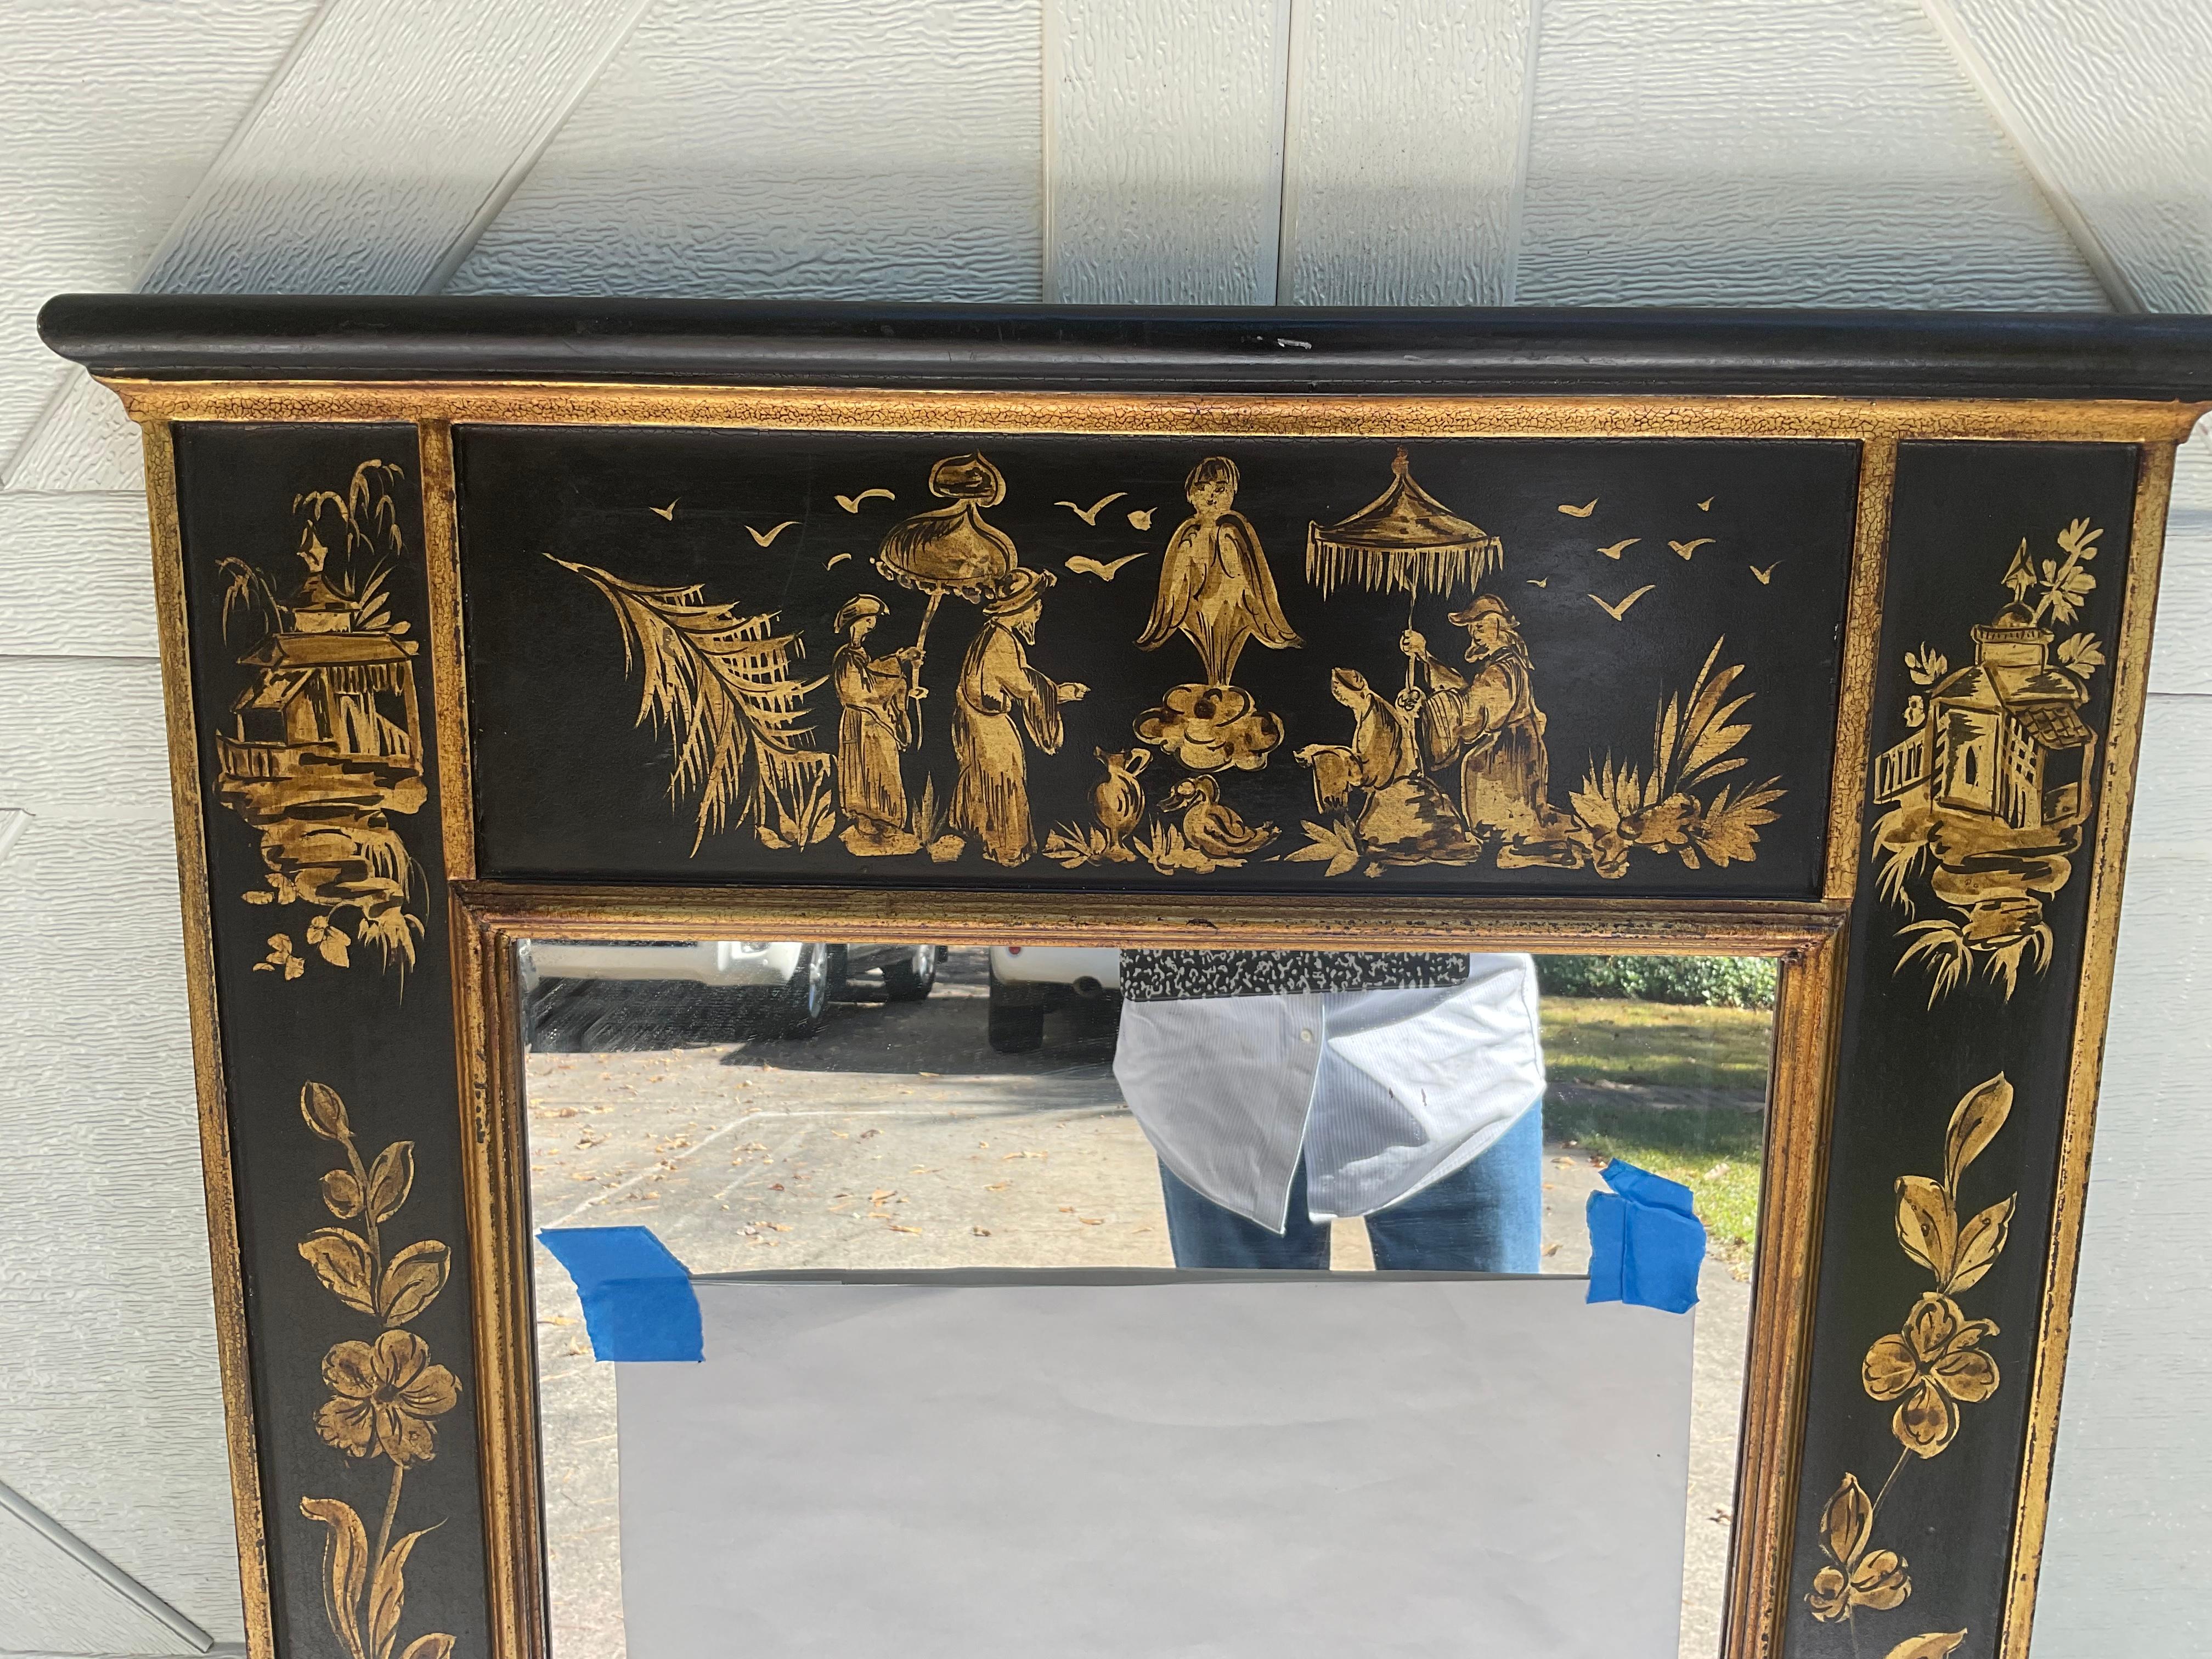 Lovely, hand painted mirror with Chinoiserie figures and scenes. Black background with gold accents. Most likely Italian, and attributed to LaBarge. The mirror itself, measures 34.75” x 17”.